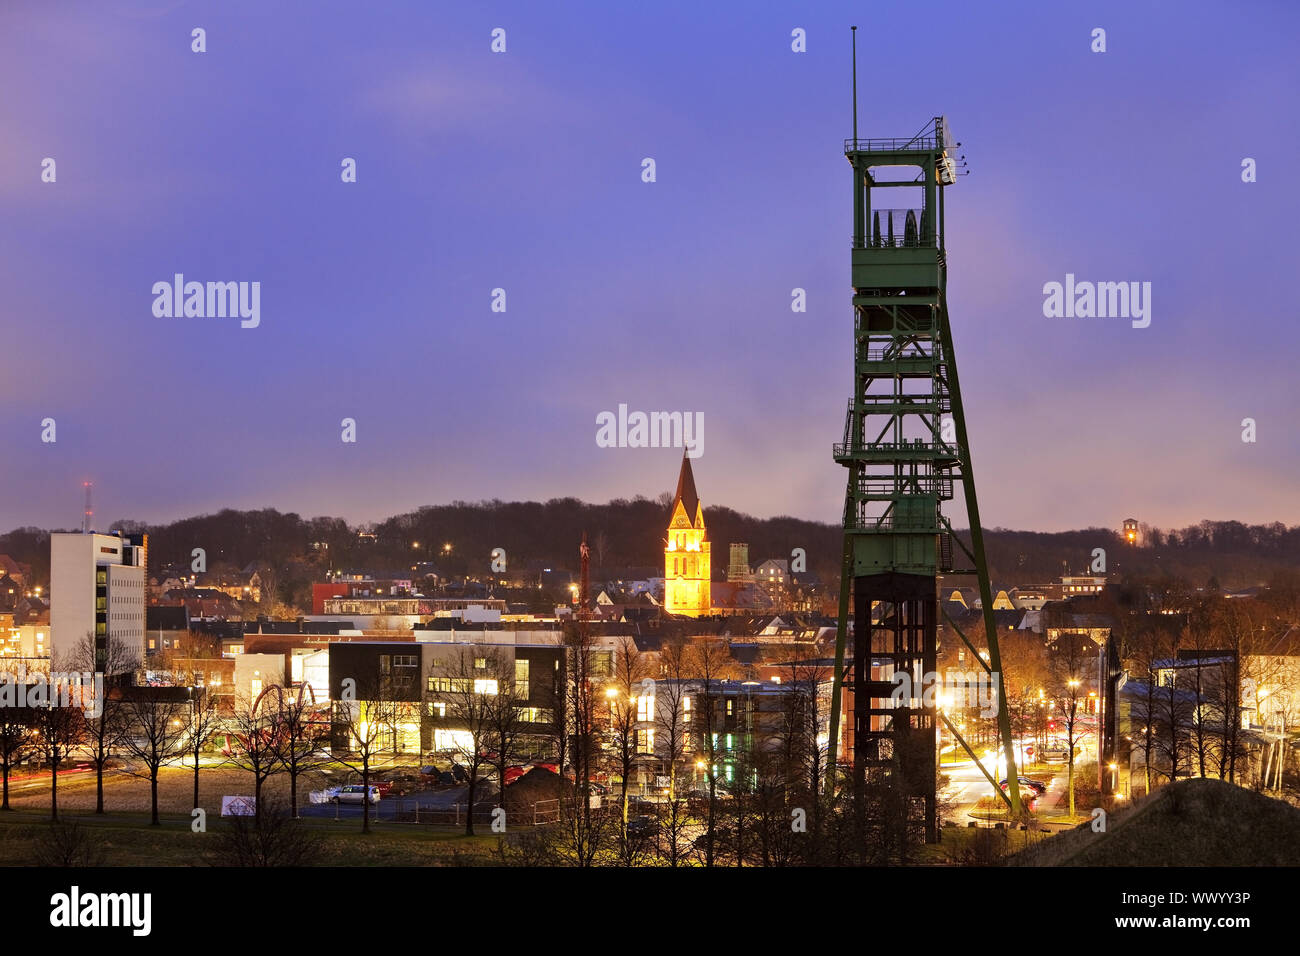 The conveyor tower of the Erin colliery at night in Castrop-Rauxel, Ruhr Area, Germany, Europe Stock Photo